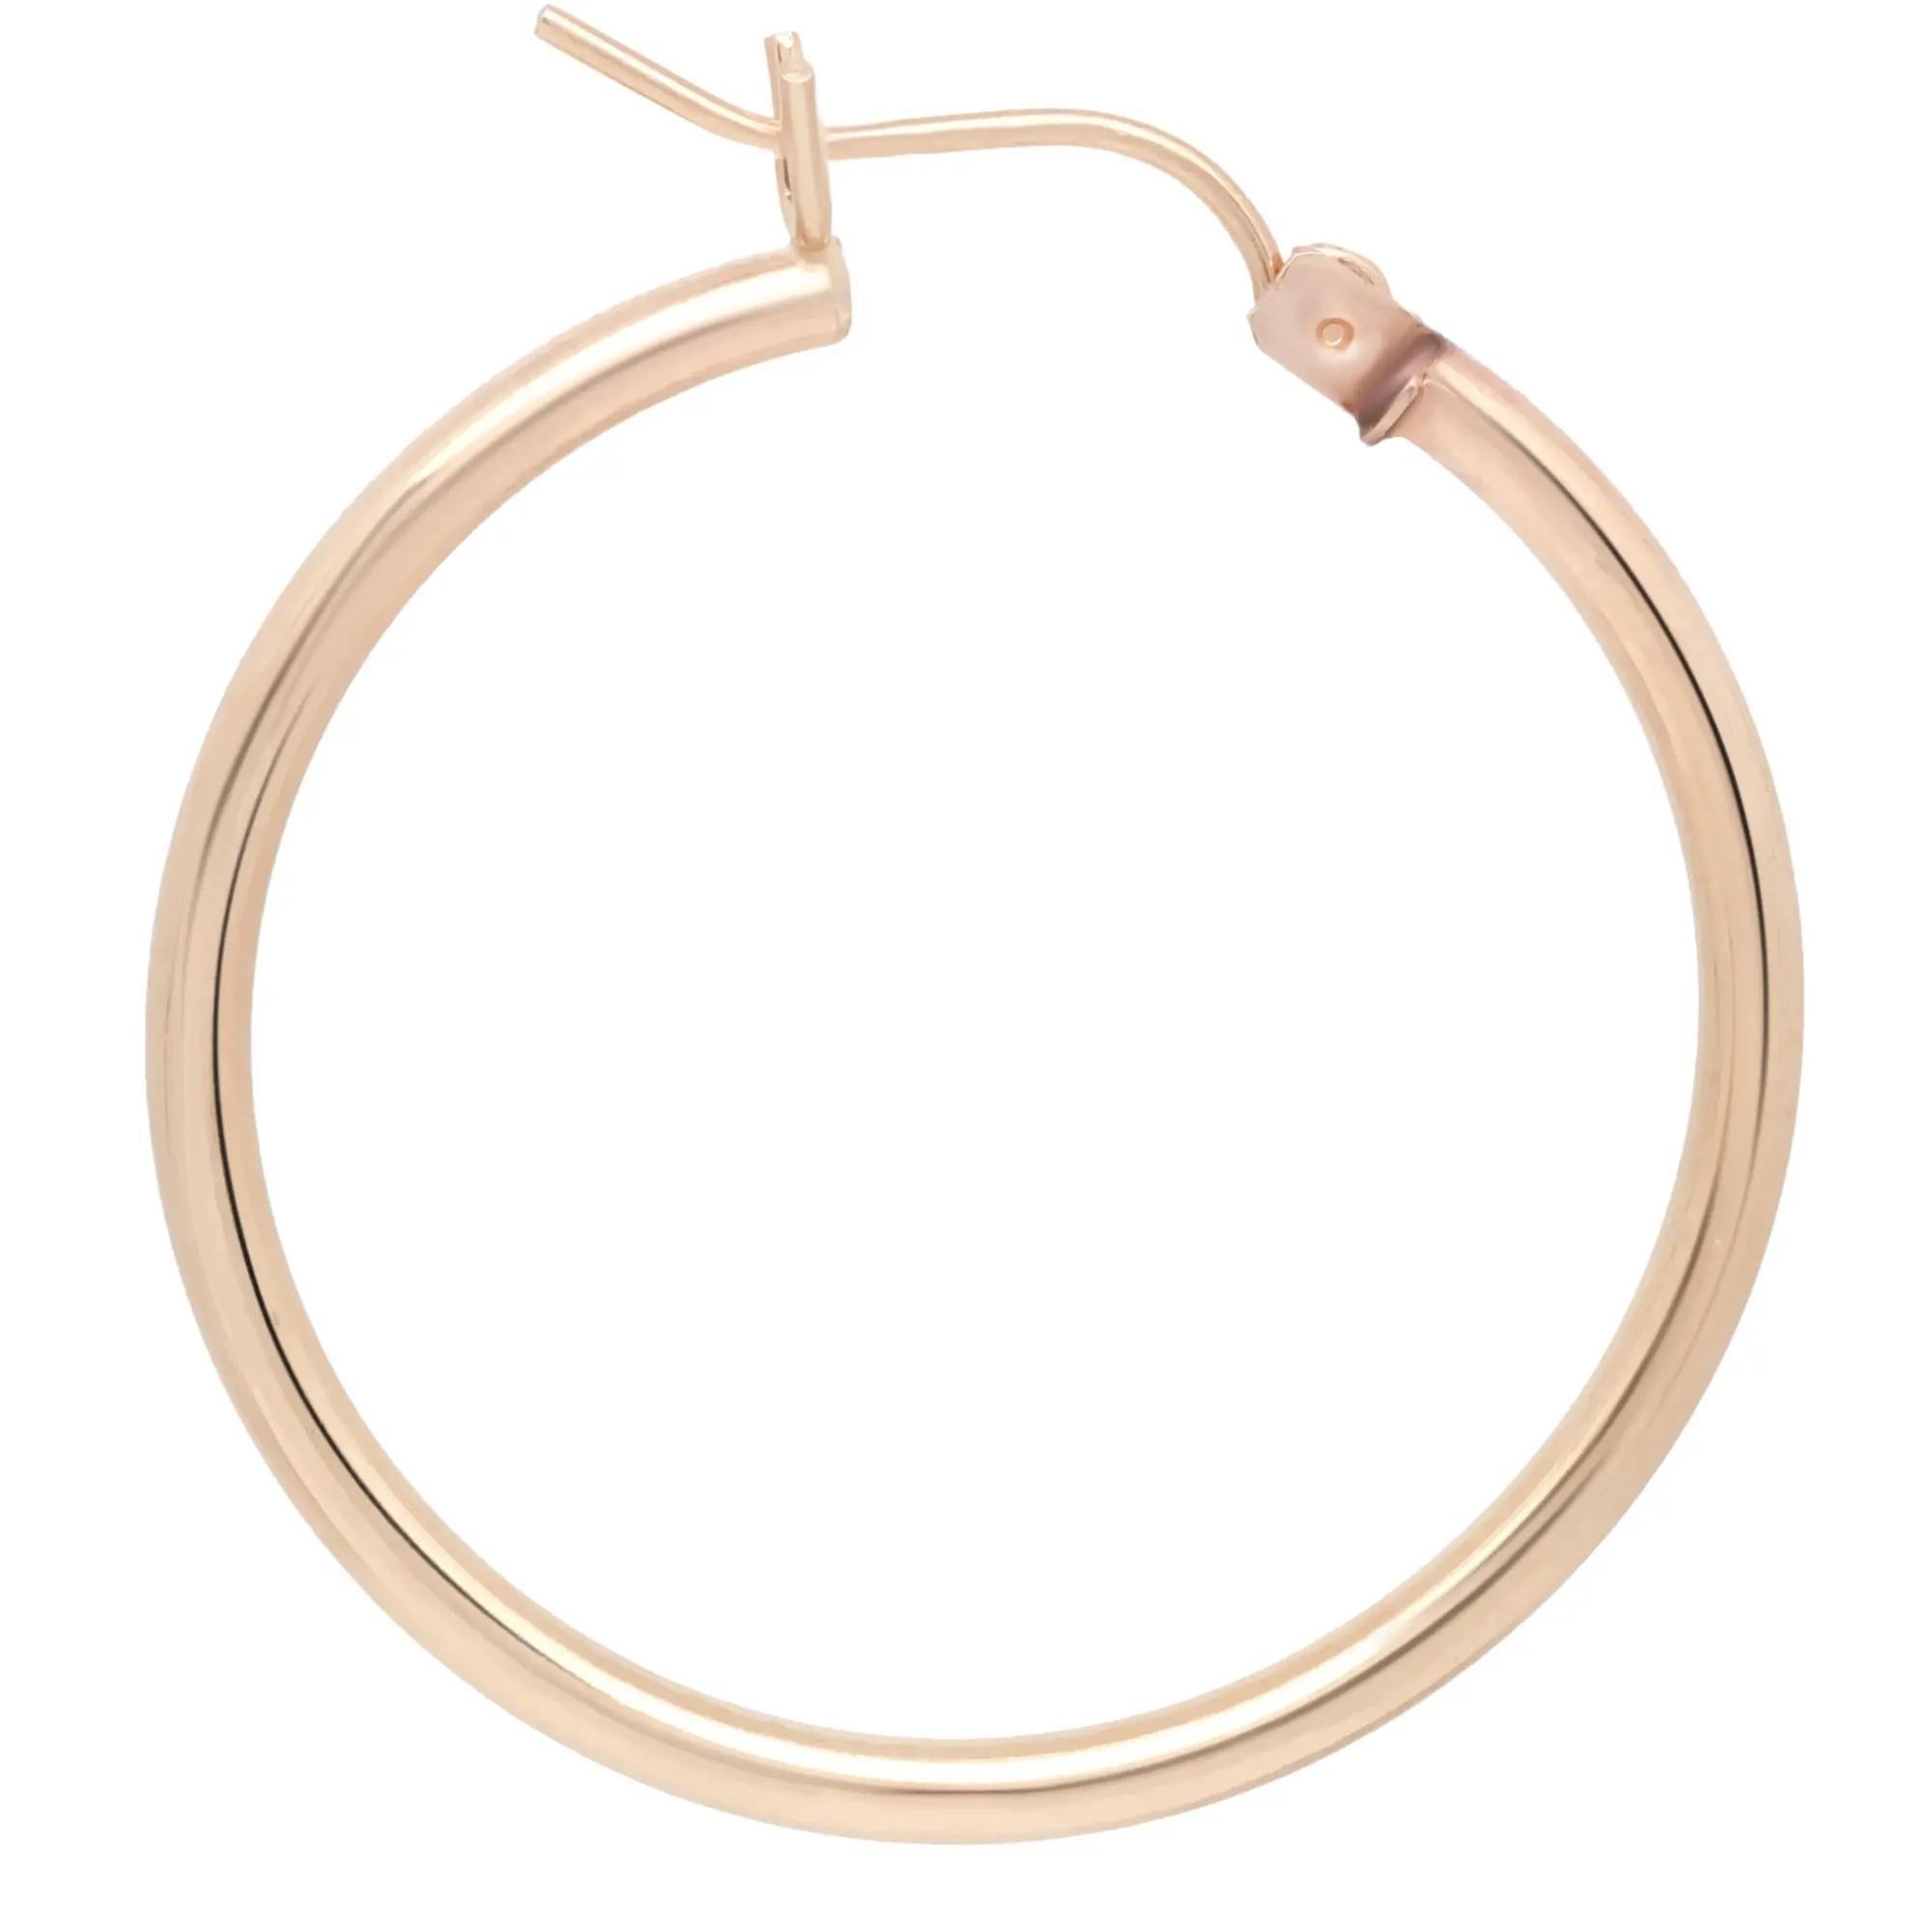 These medium round hoop earrings are crafted in 14k yellow gold and feature a majestic glow of high polish finish. This pair of hoop earrings will make a fashion statement and definitely be an eye catching pair. Size: 1.1 inches. Width: 2mm.